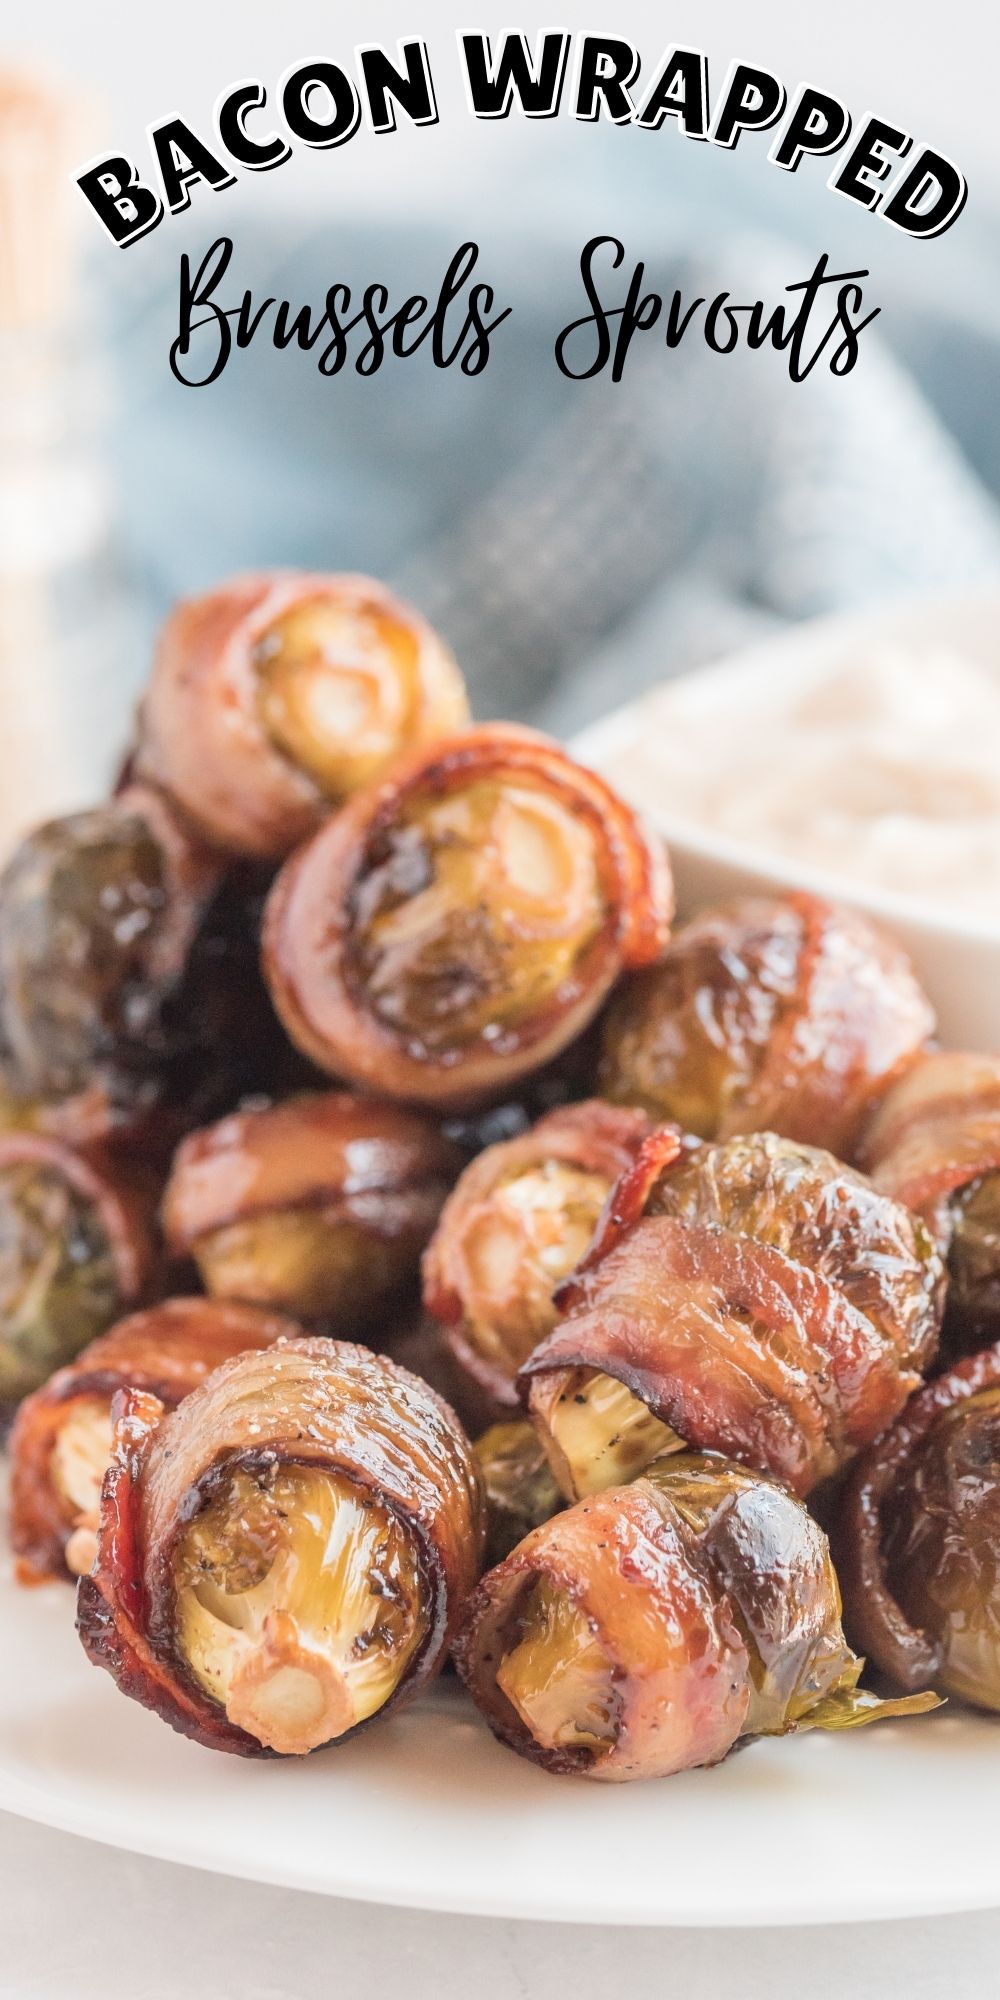 If you're looking for a delicious appetizer or side dish, these Bacon Wrapped Brussels Sprouts are just the thing! via @familyfresh